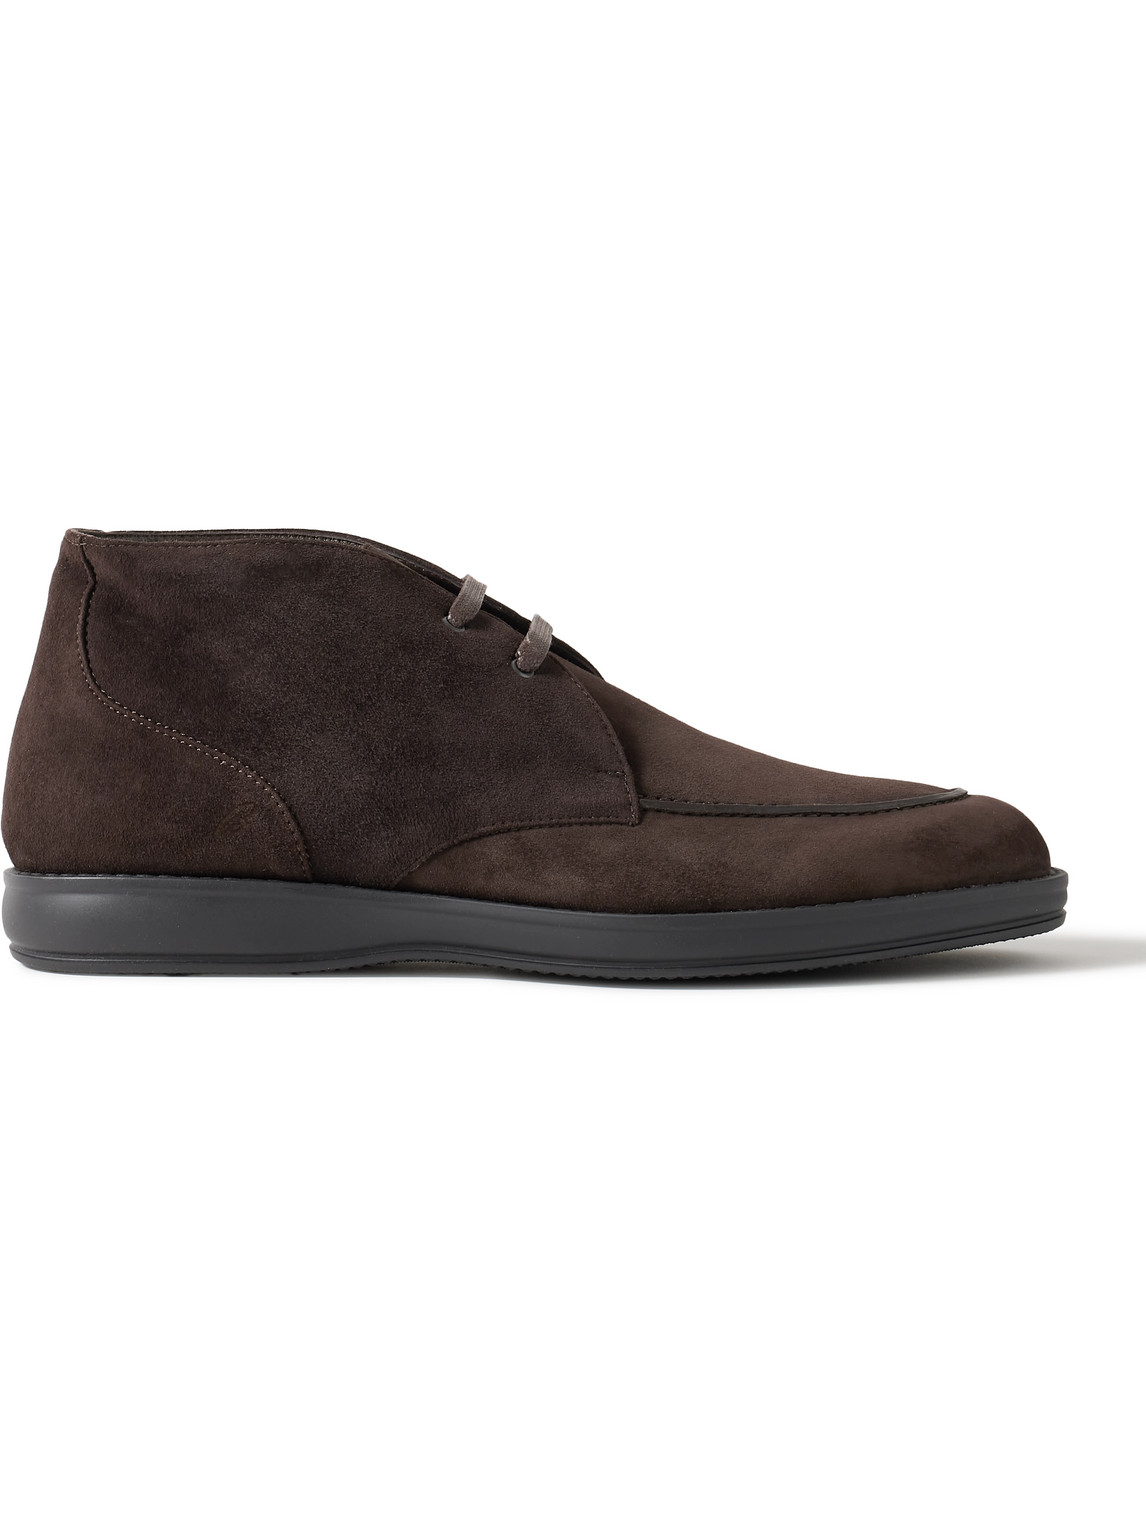 BRIONI YORK LEATHER-TRIMMED SUEDE CHUKKA BOOTS